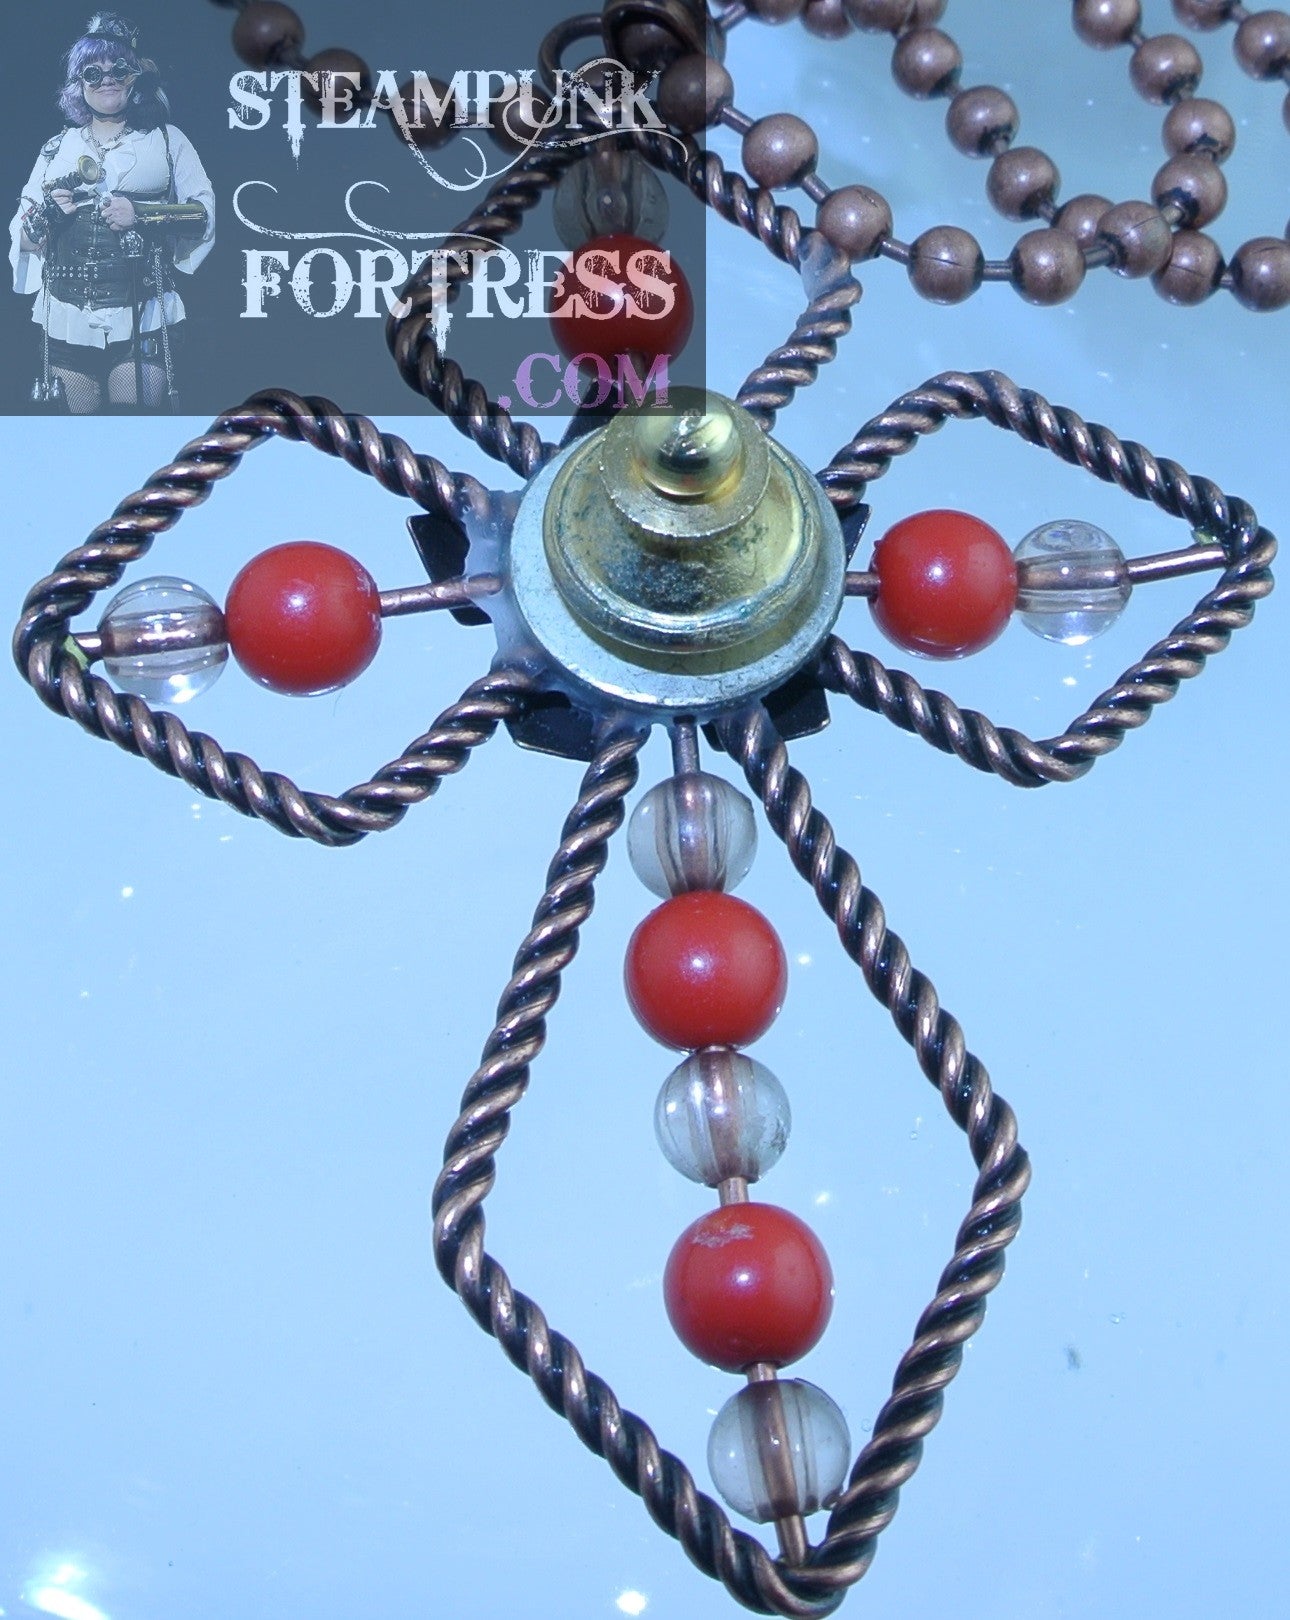 PIN BROOCH COPPER CROSS TWISTED FLOWER CENTER RED BEADS NECKLACE VERSATILE MULTI USE STARR WILDE STEAMPUNK FORTRESS